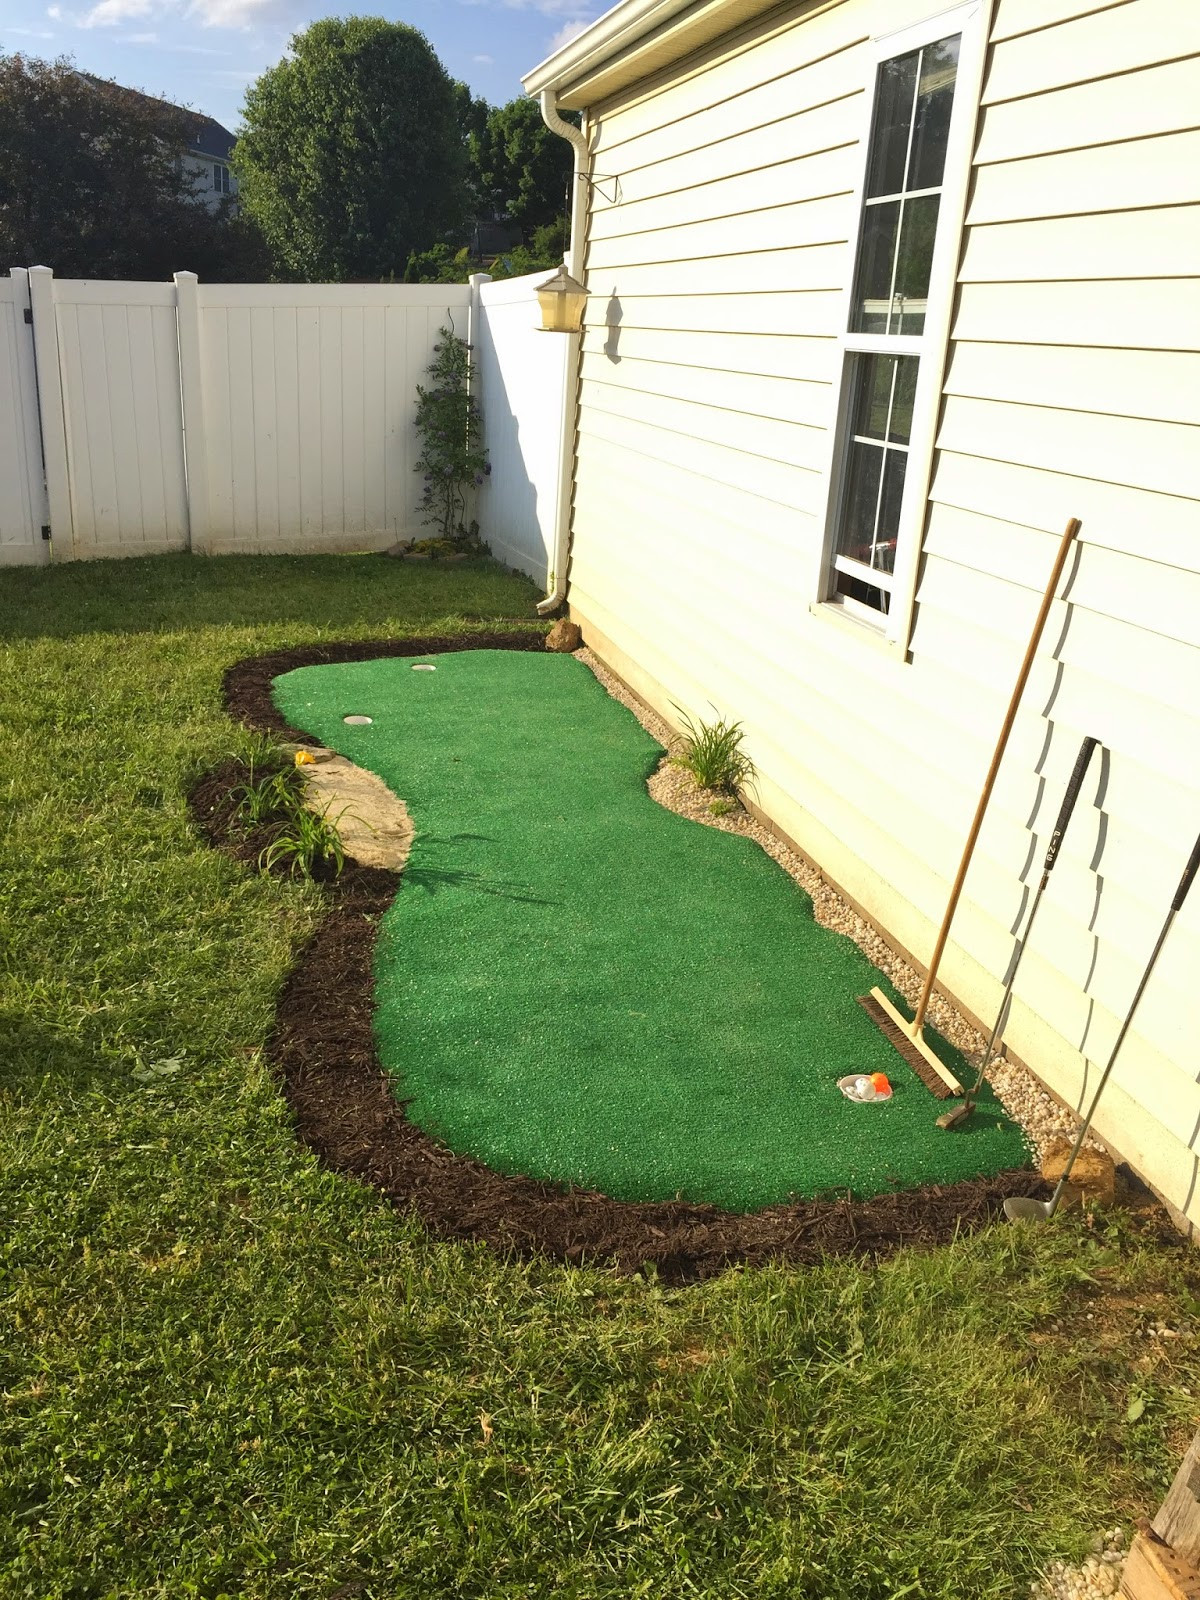 Best ideas about DIY Outdoor Putting Green
. Save or Pin Little Bit Funky How to make a backyard putting green Now.